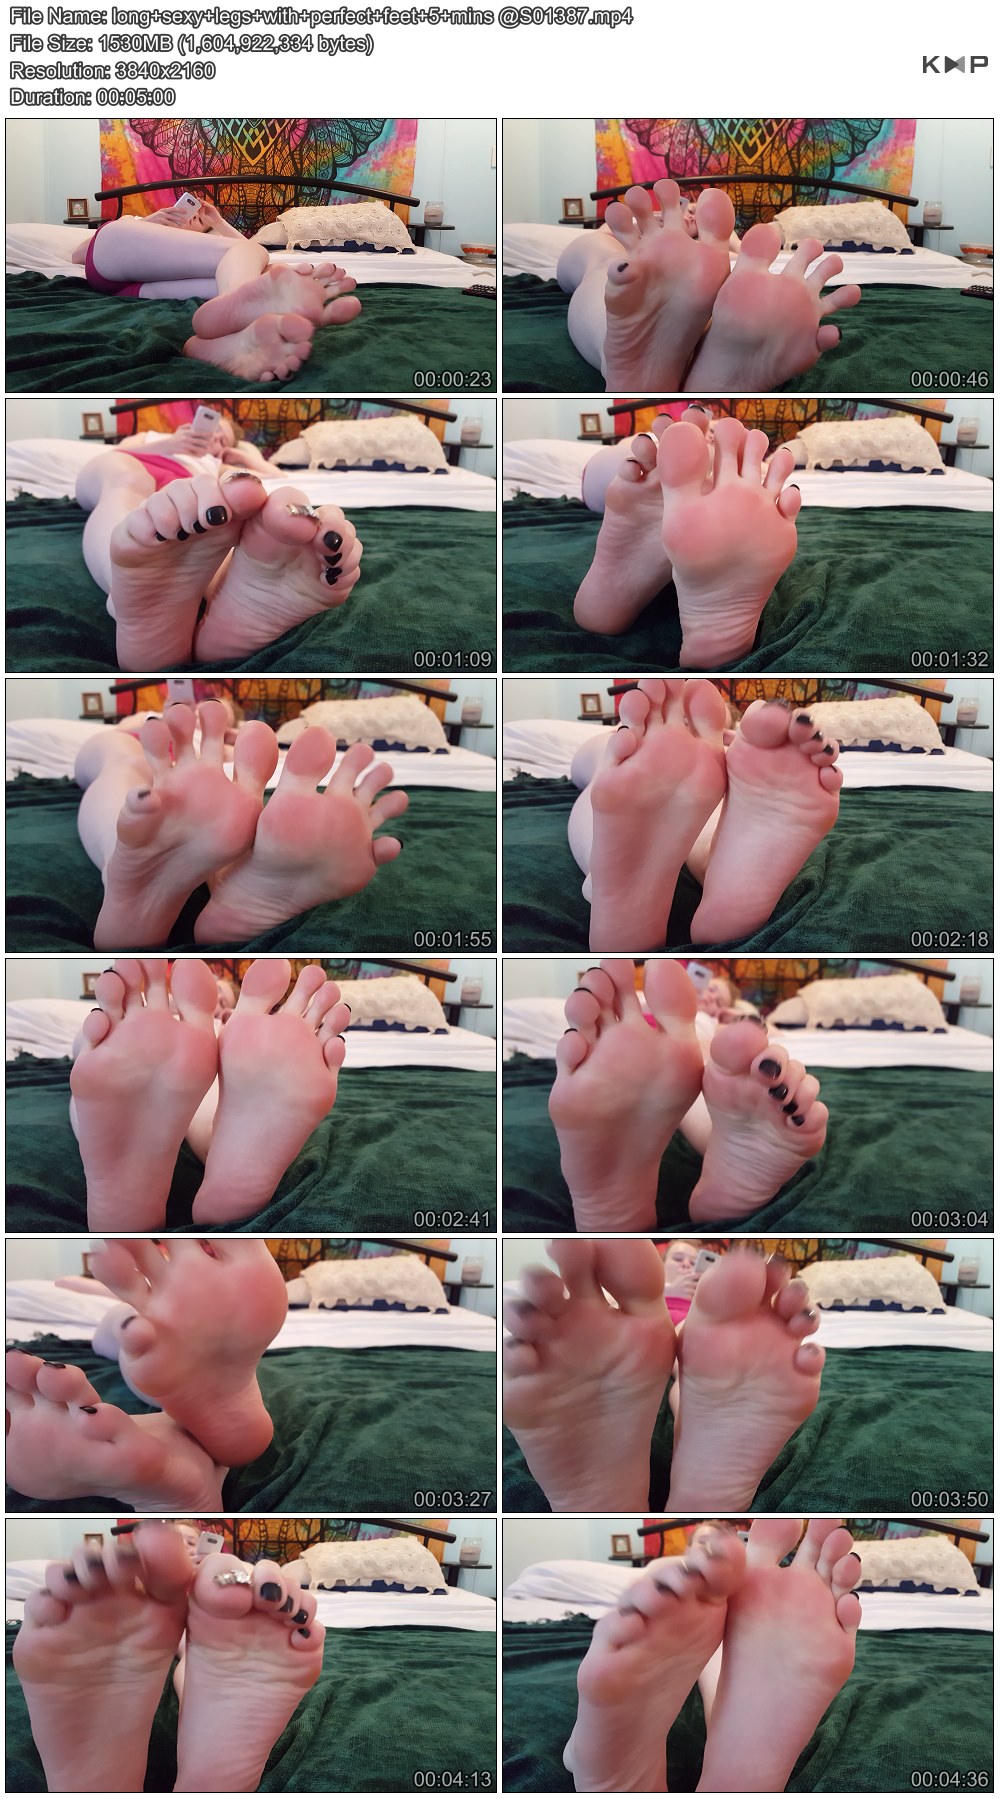 long sexy legs with perfect feet 5 mins @S01387.JPG